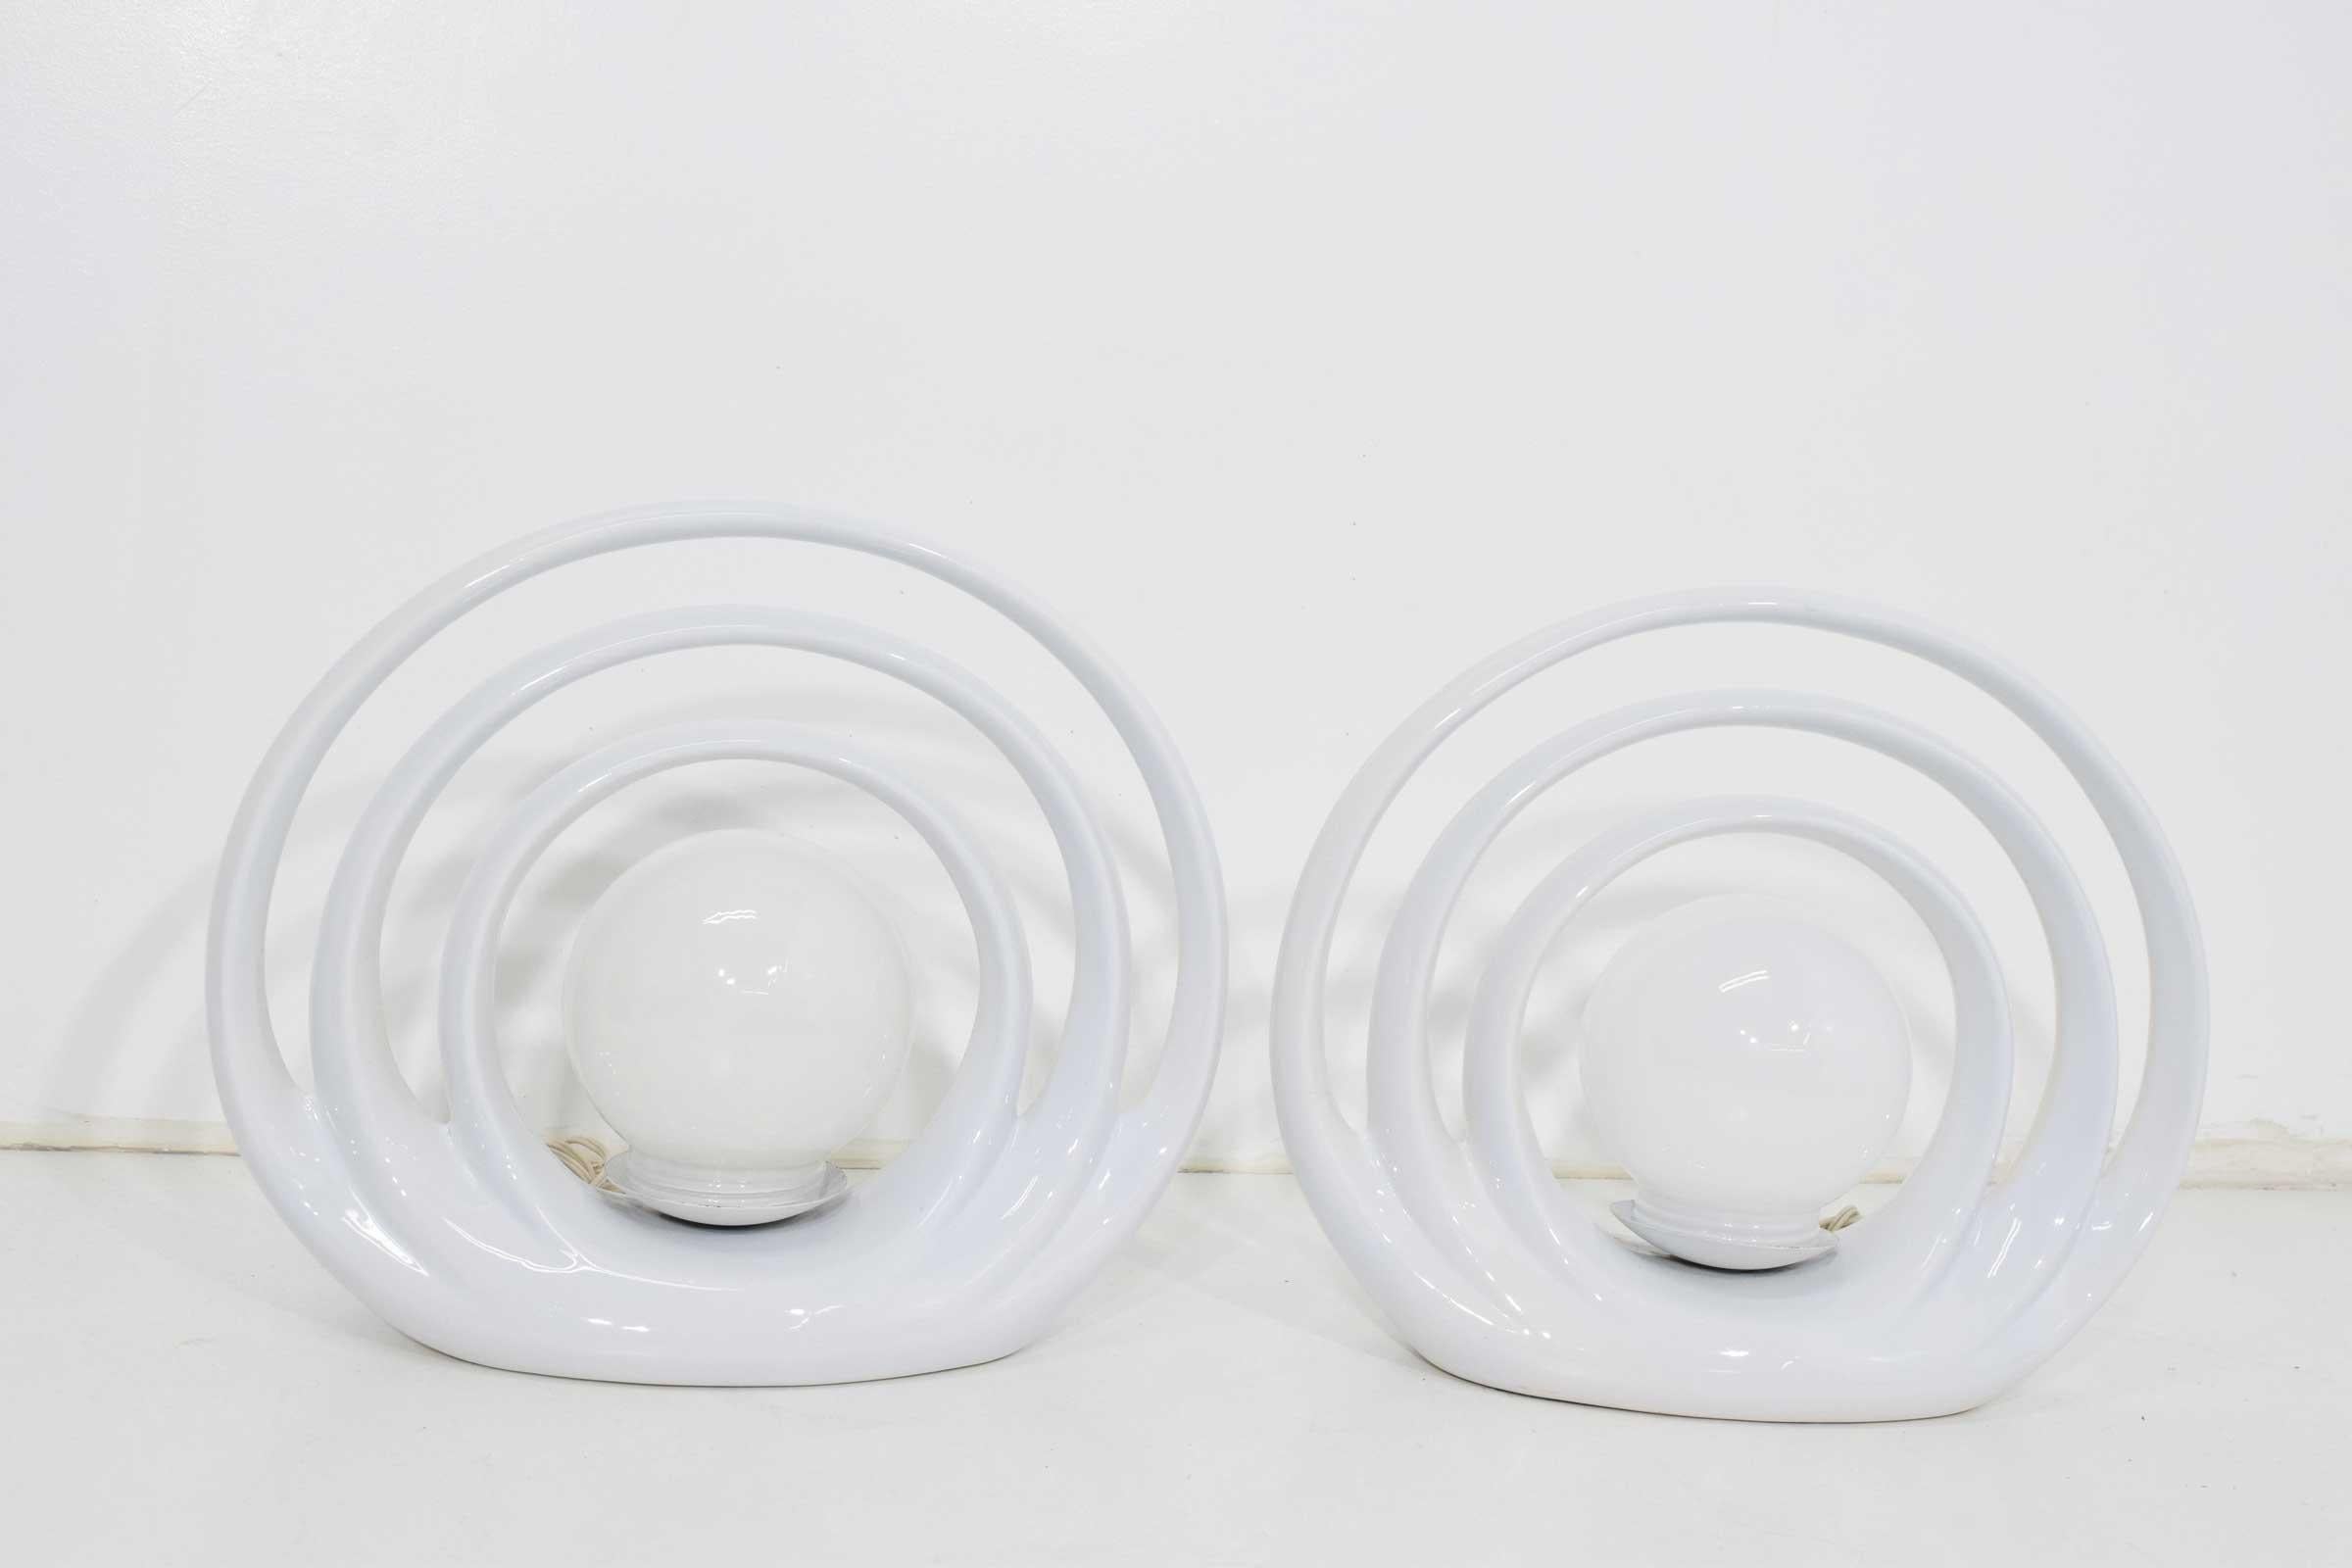 American Pair of Midcentury Circular Table Lamps, 1960s For Sale